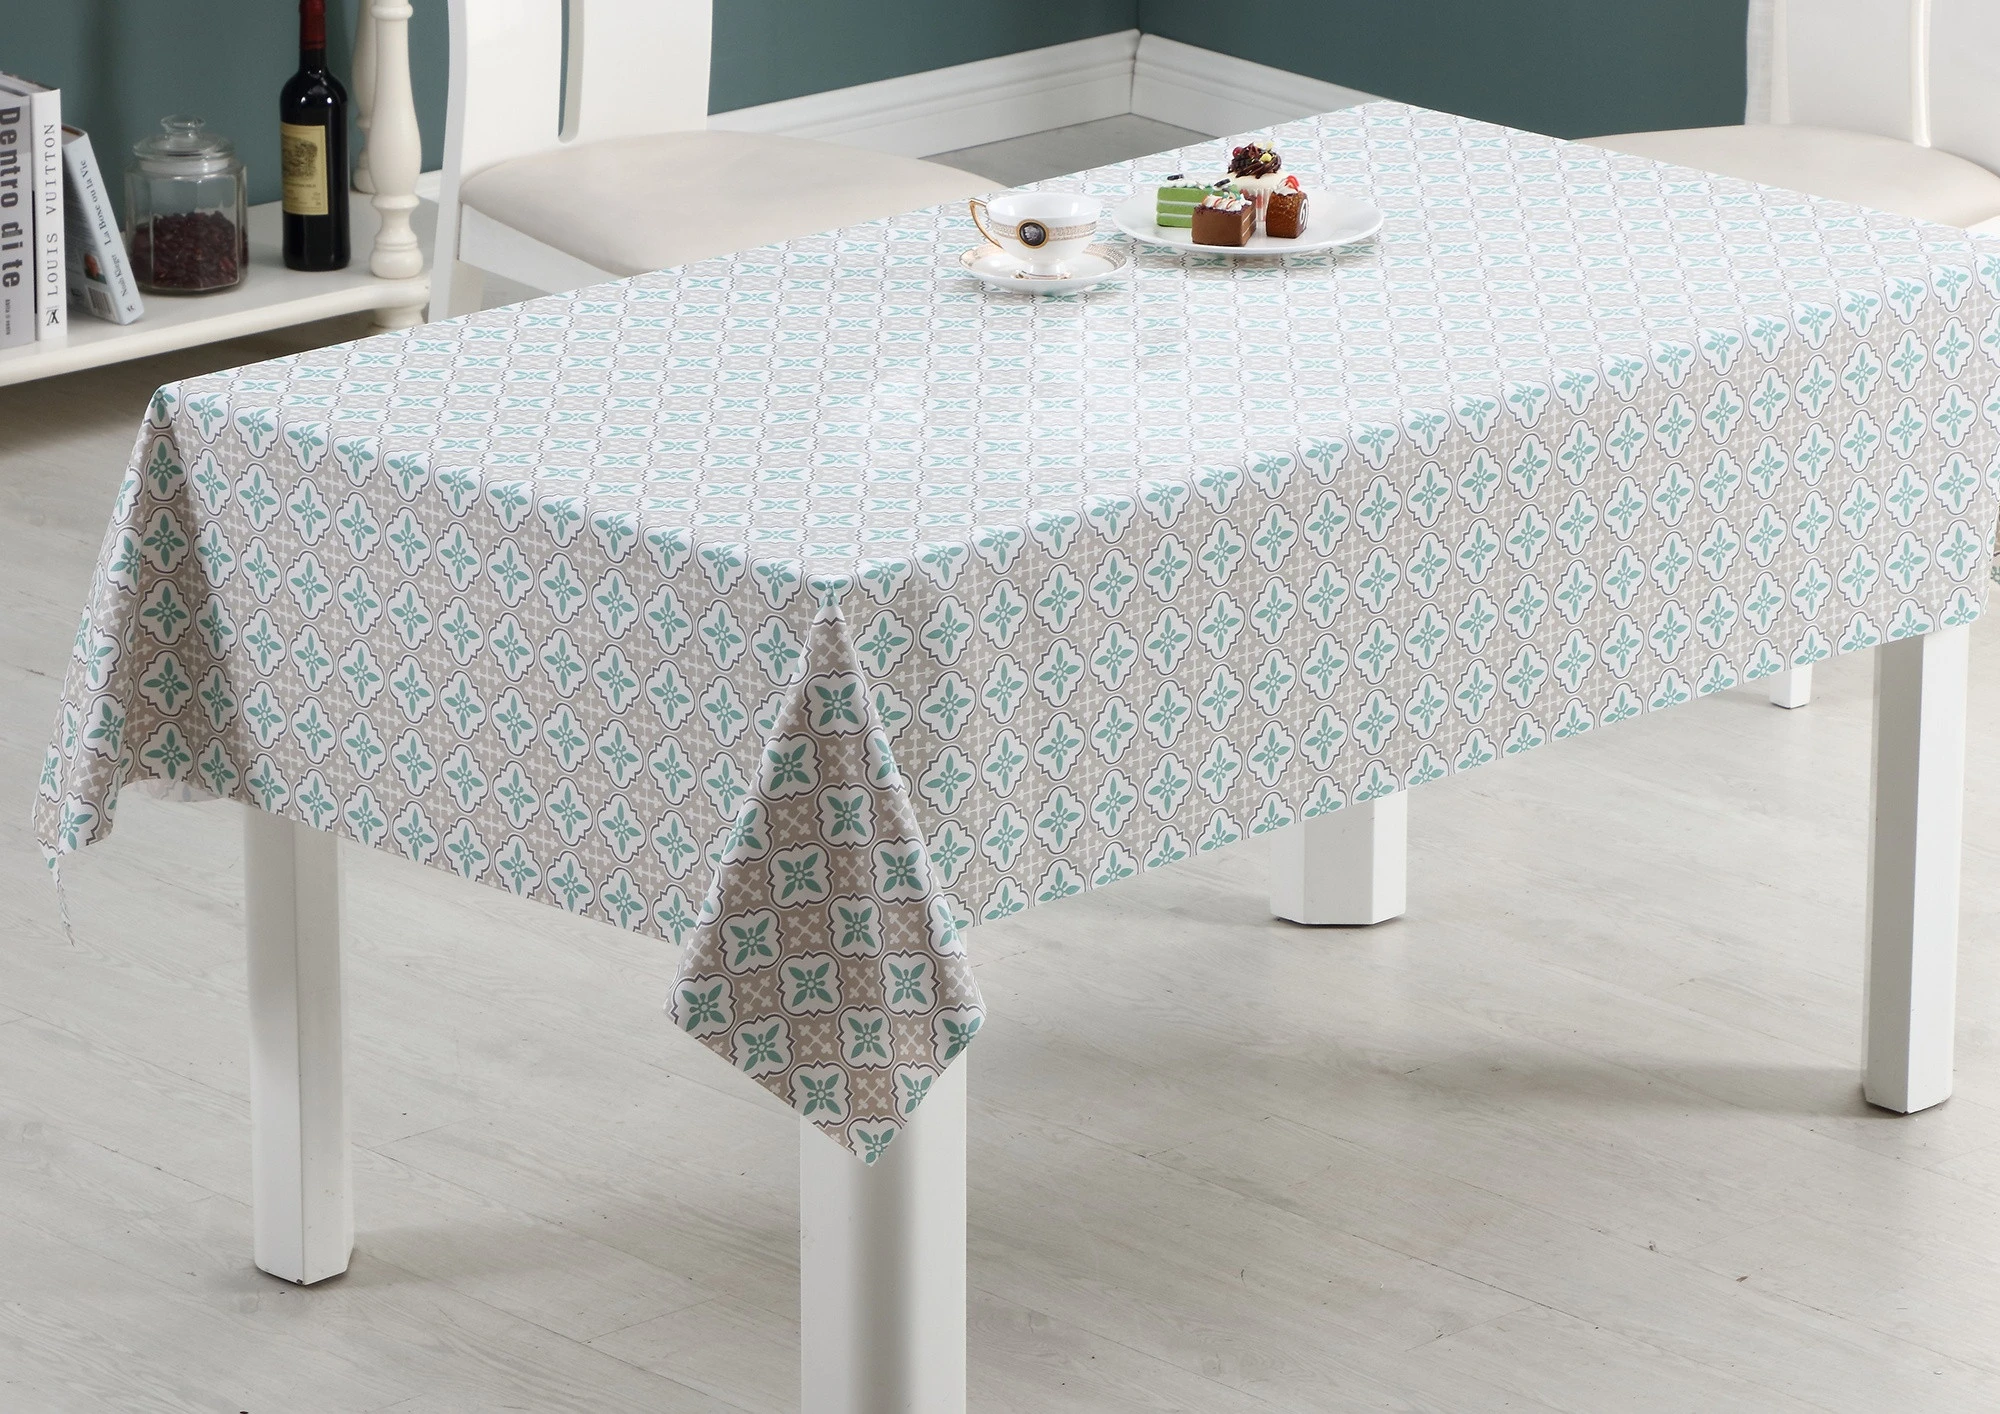 Printing Waterproof Oilproof Heat Resistant Eco-friendly PVC Table Cloth Vinyl Tablecloth